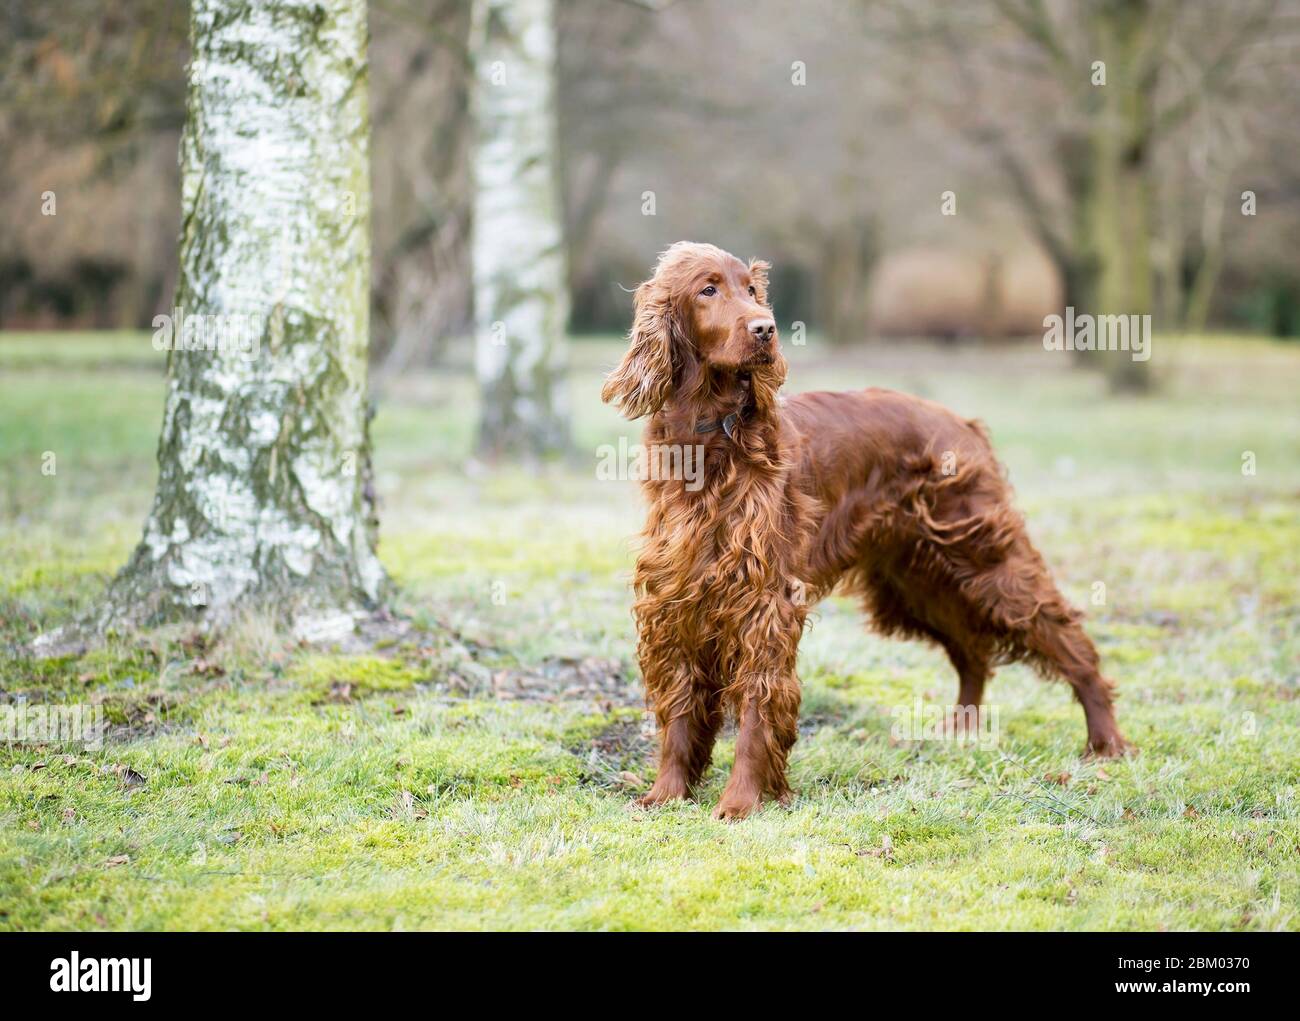 Beautiful young Irish Setter dog standing in the park Stock Photo